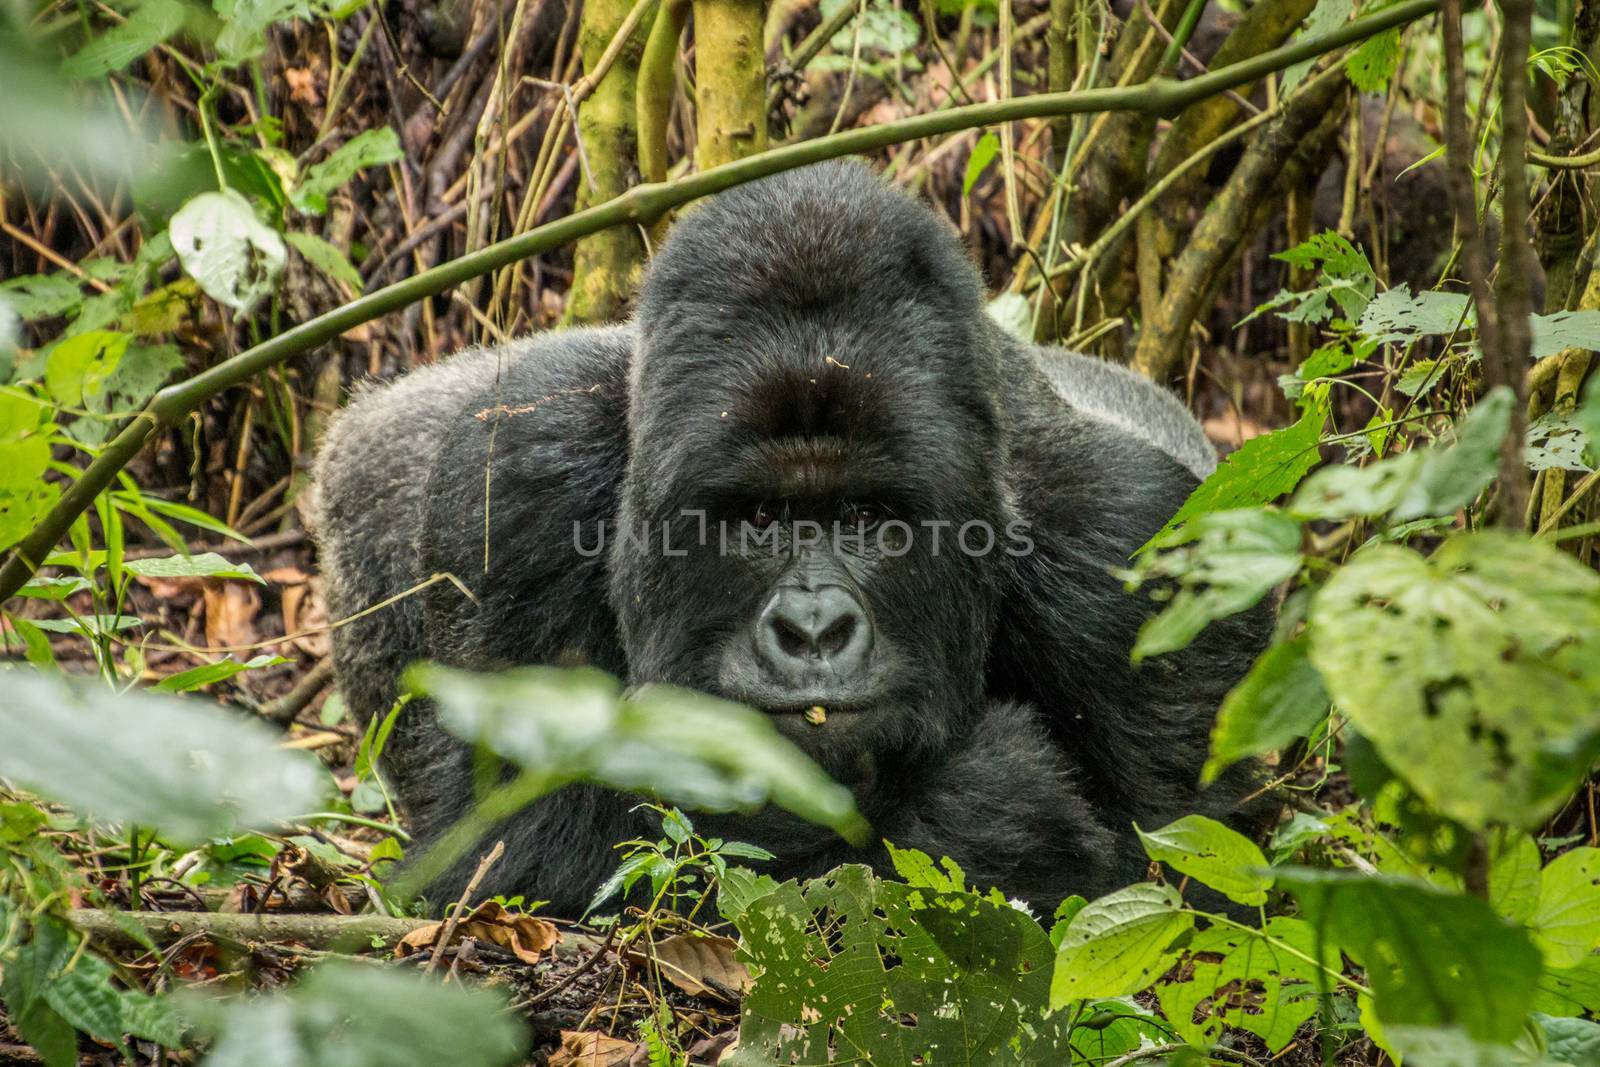 Silverback Mountain gorilla laying in the leaves in the Virunga National Park, Democratic Republic Of Congo.